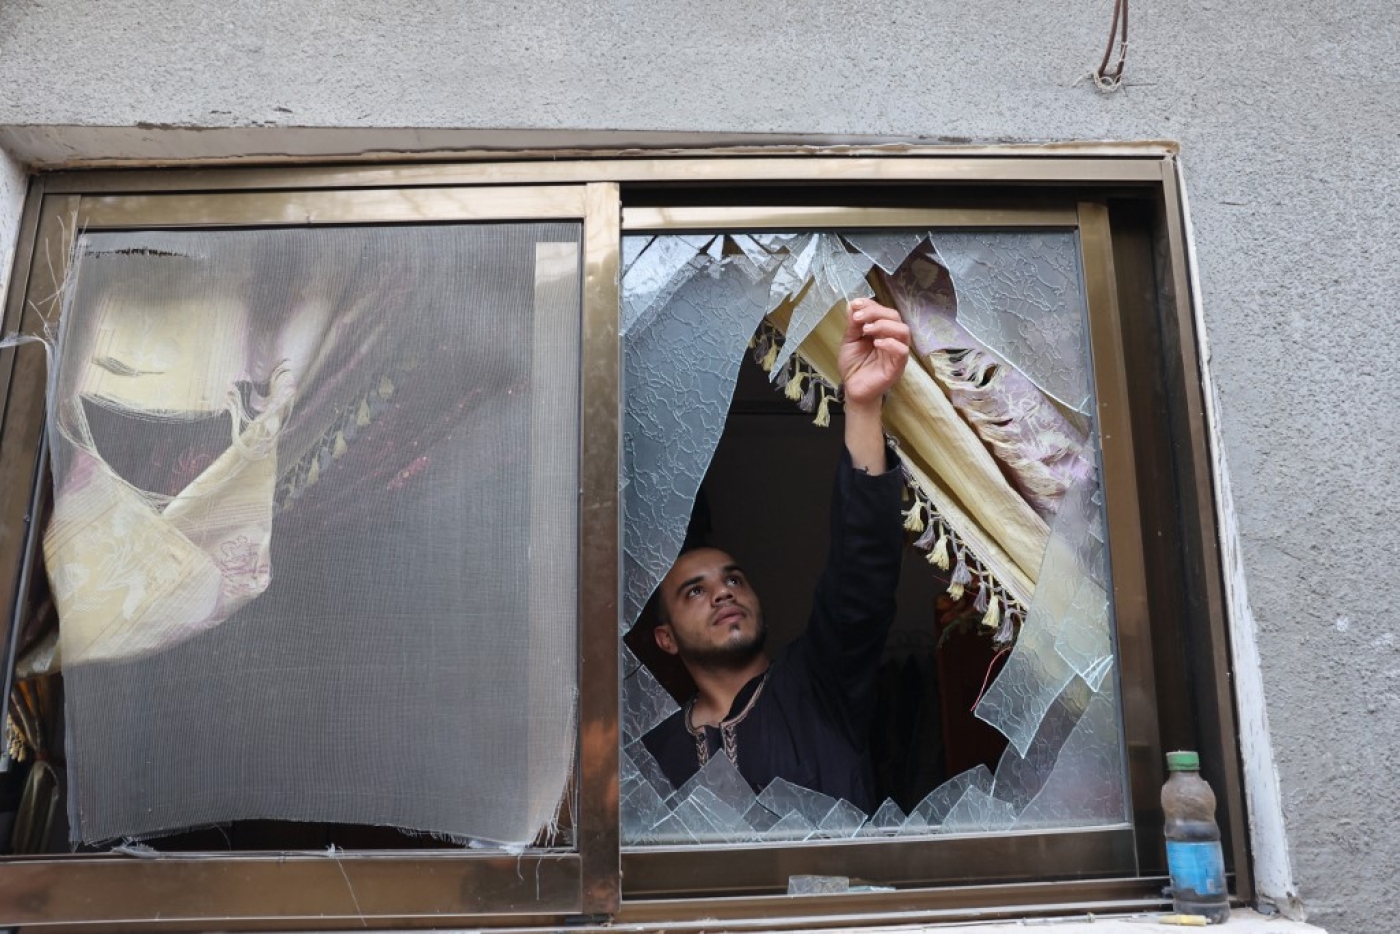 A Palestinian man removes glass shards from a broken window at his home which was damaged by Israeli air strikes in Rafah in the southern Gaza Strip, on 8 August 2022 (AFP)